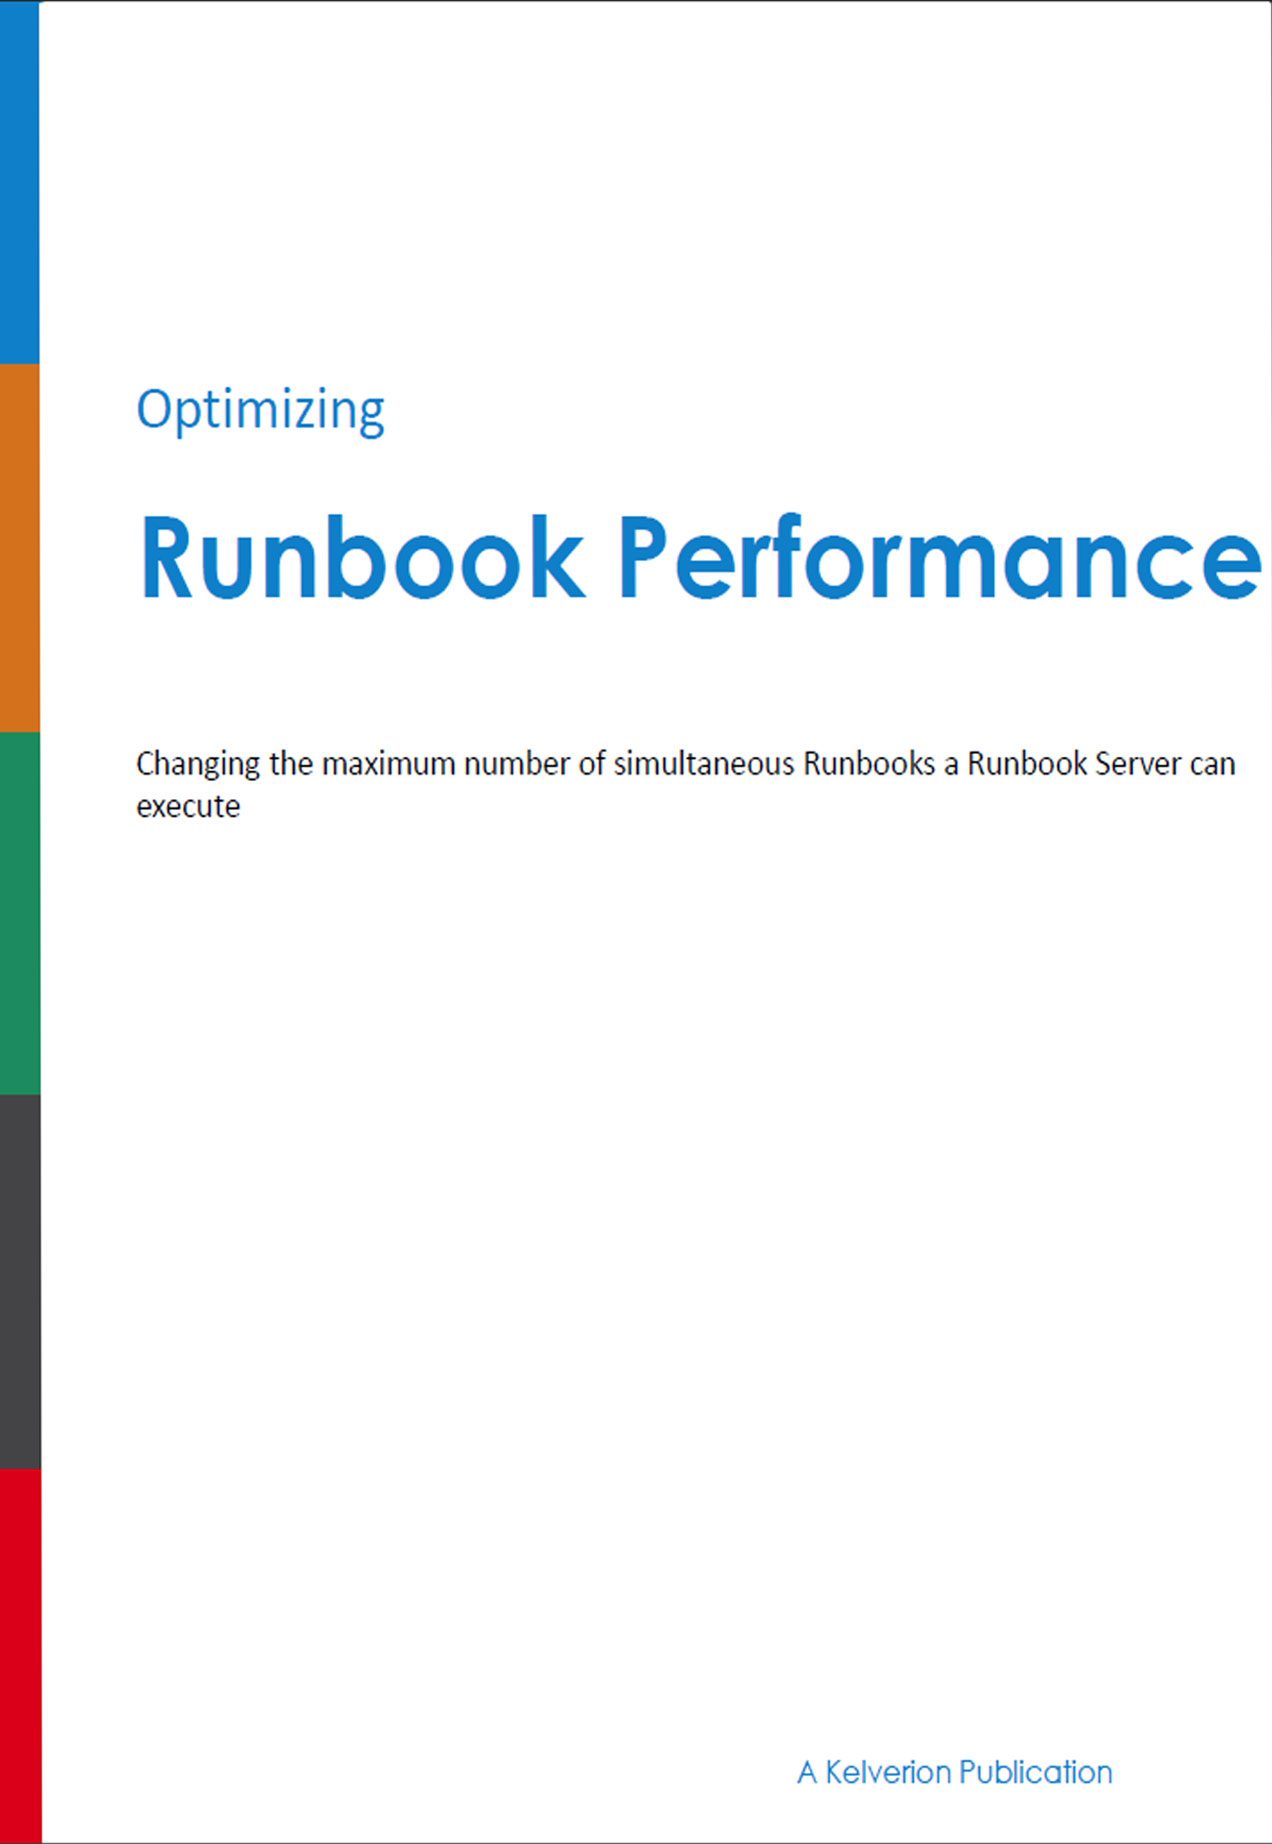 Optimizing runbook performance guide front cover